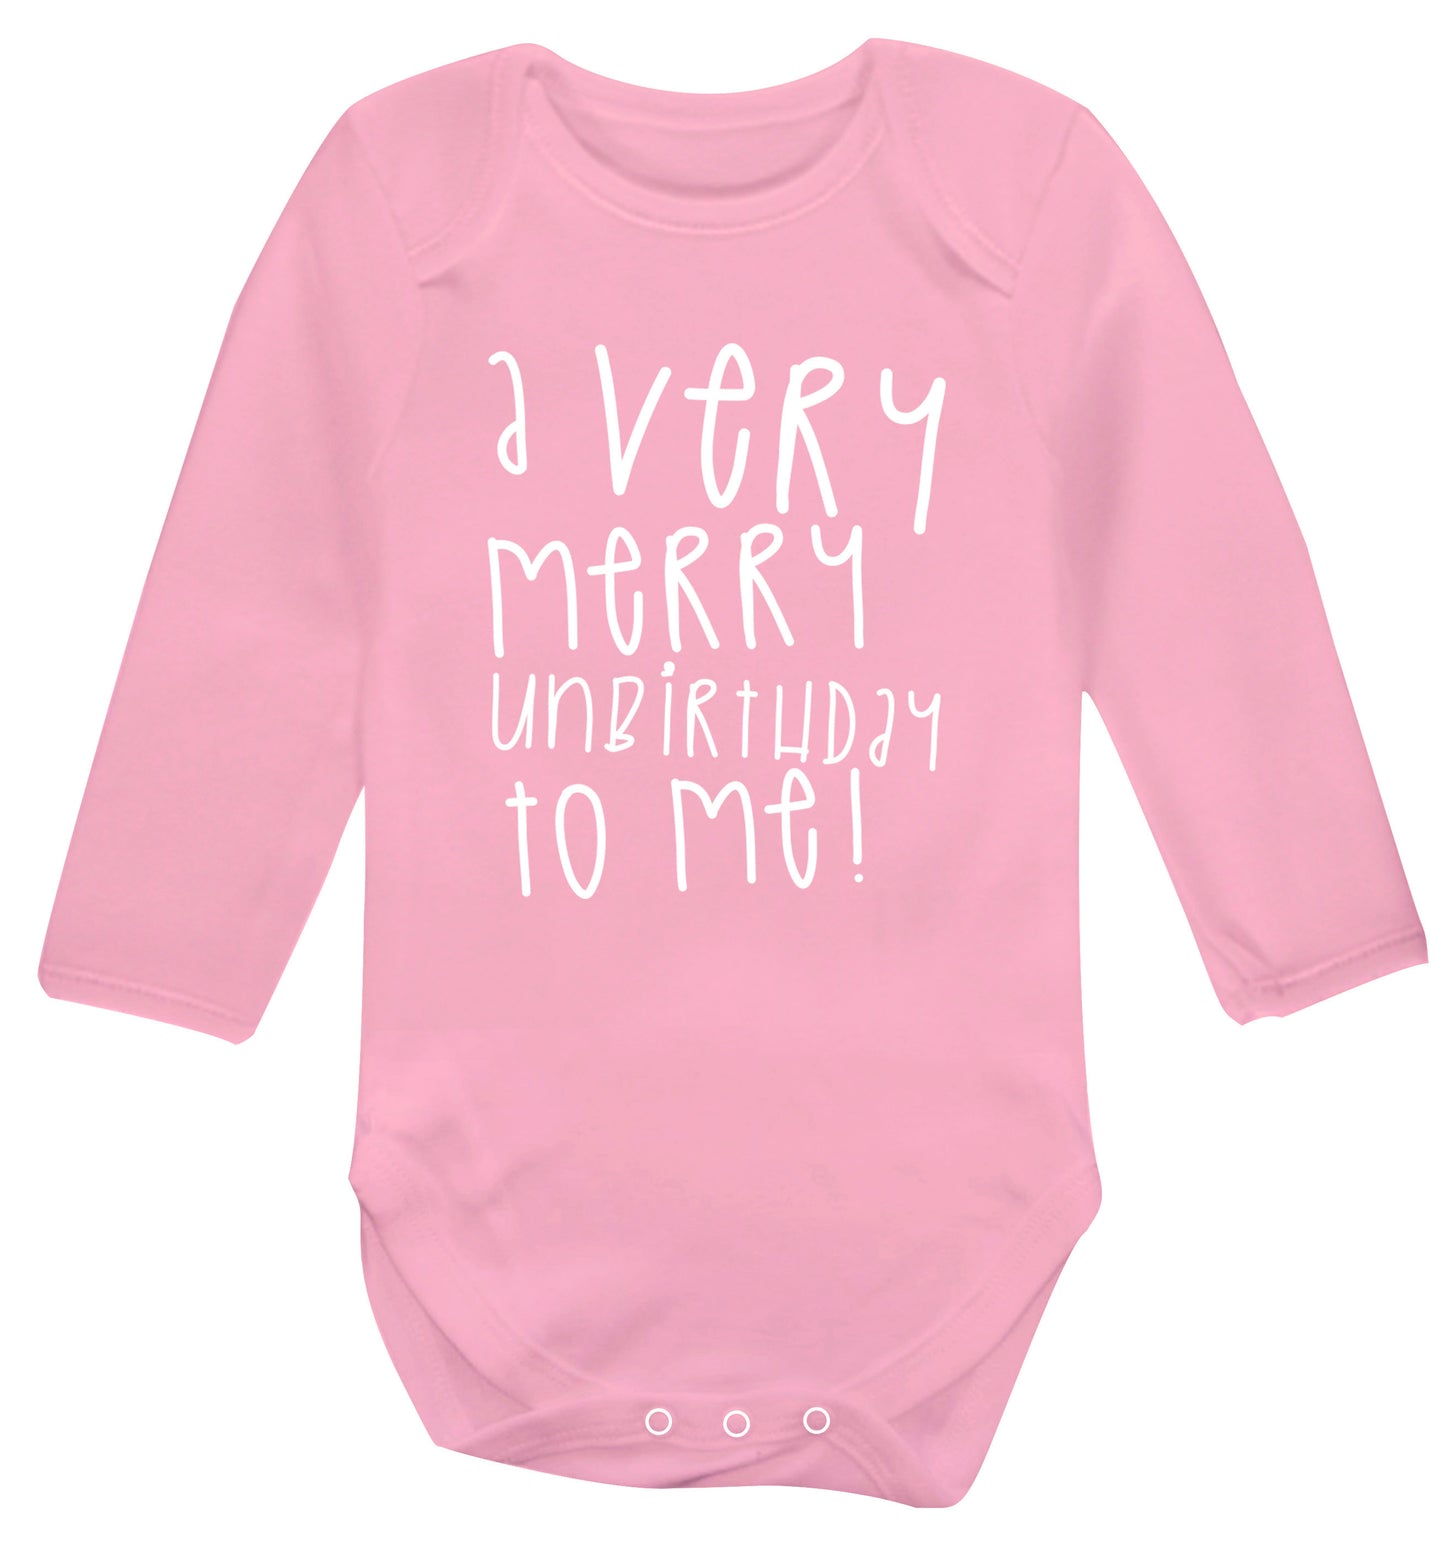 A very merry unbirthday to me! Baby Vest long sleeved pale pink 6-12 months